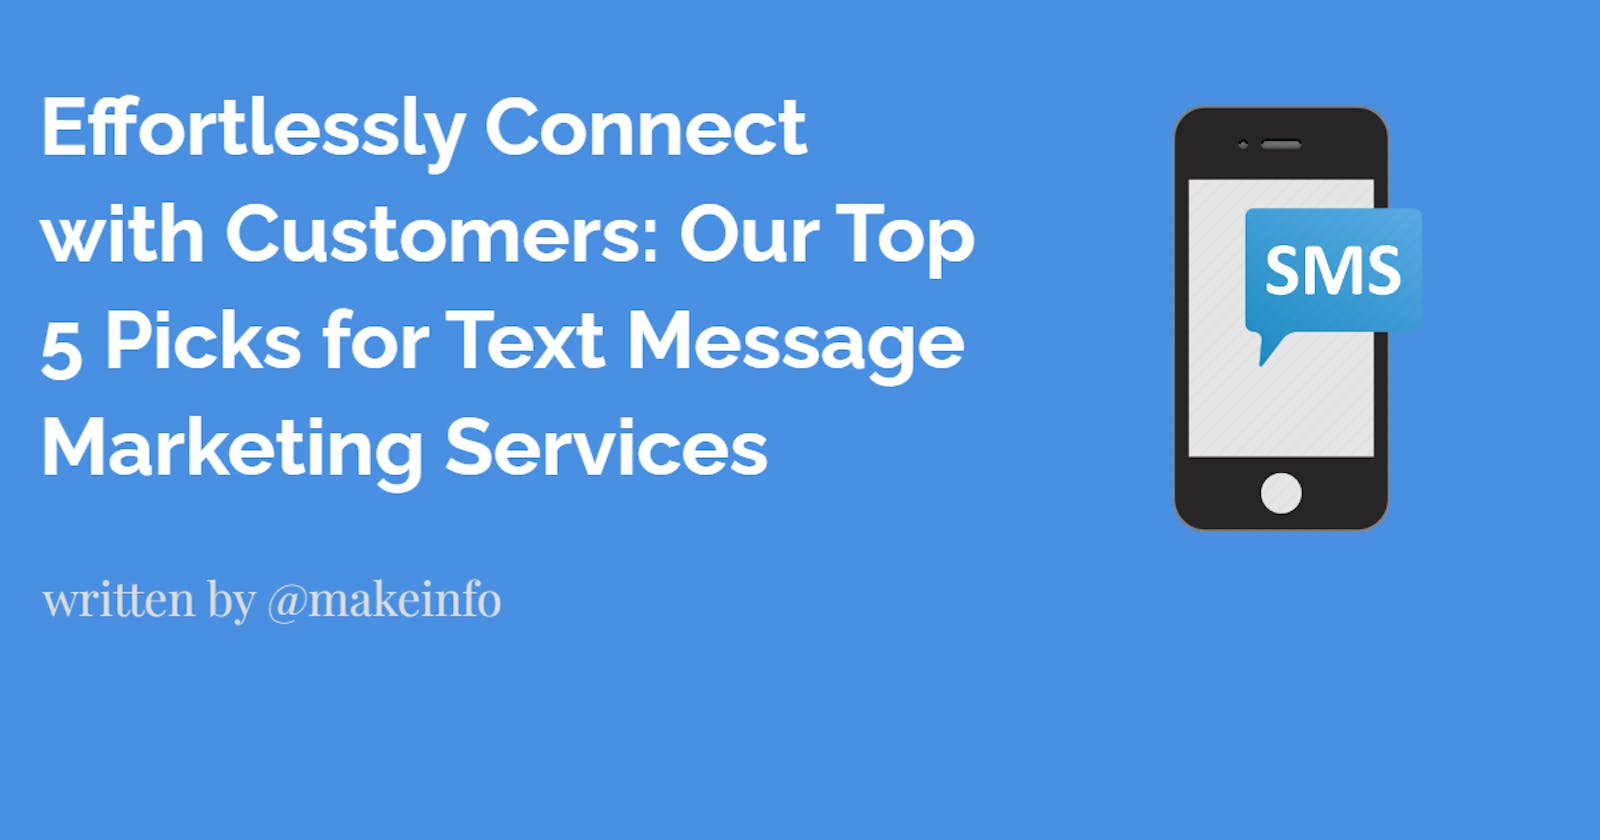 Effortlessly Connect with Customers: Our Top 5 Picks for Text Message Marketing Services